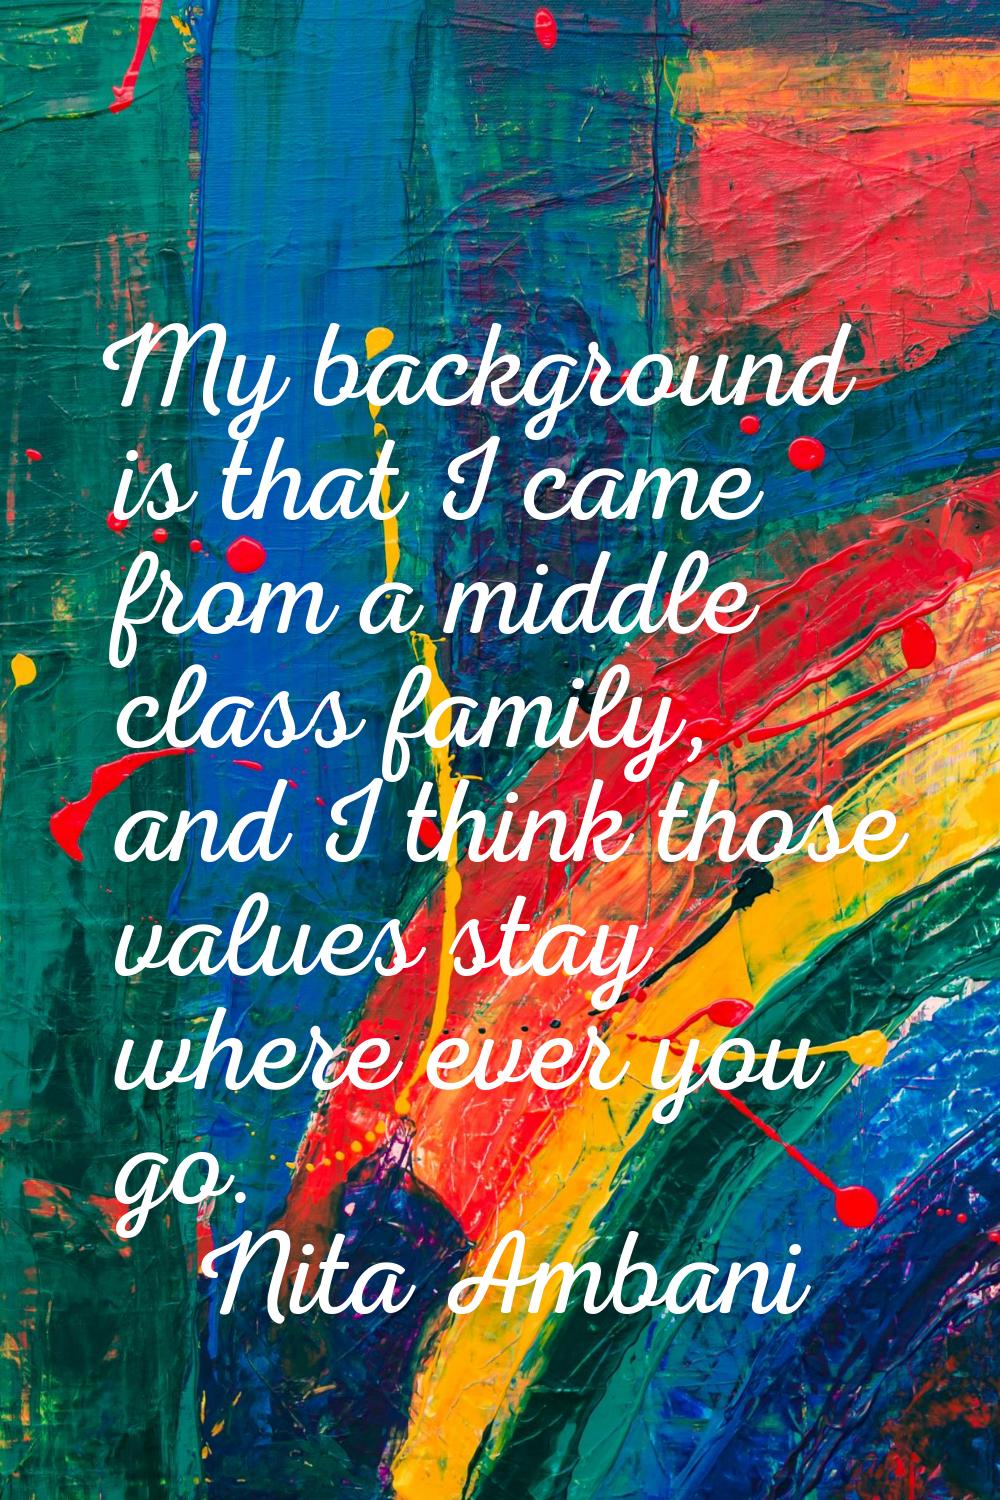 My background is that I came from a middle class family, and I think those values stay where ever y